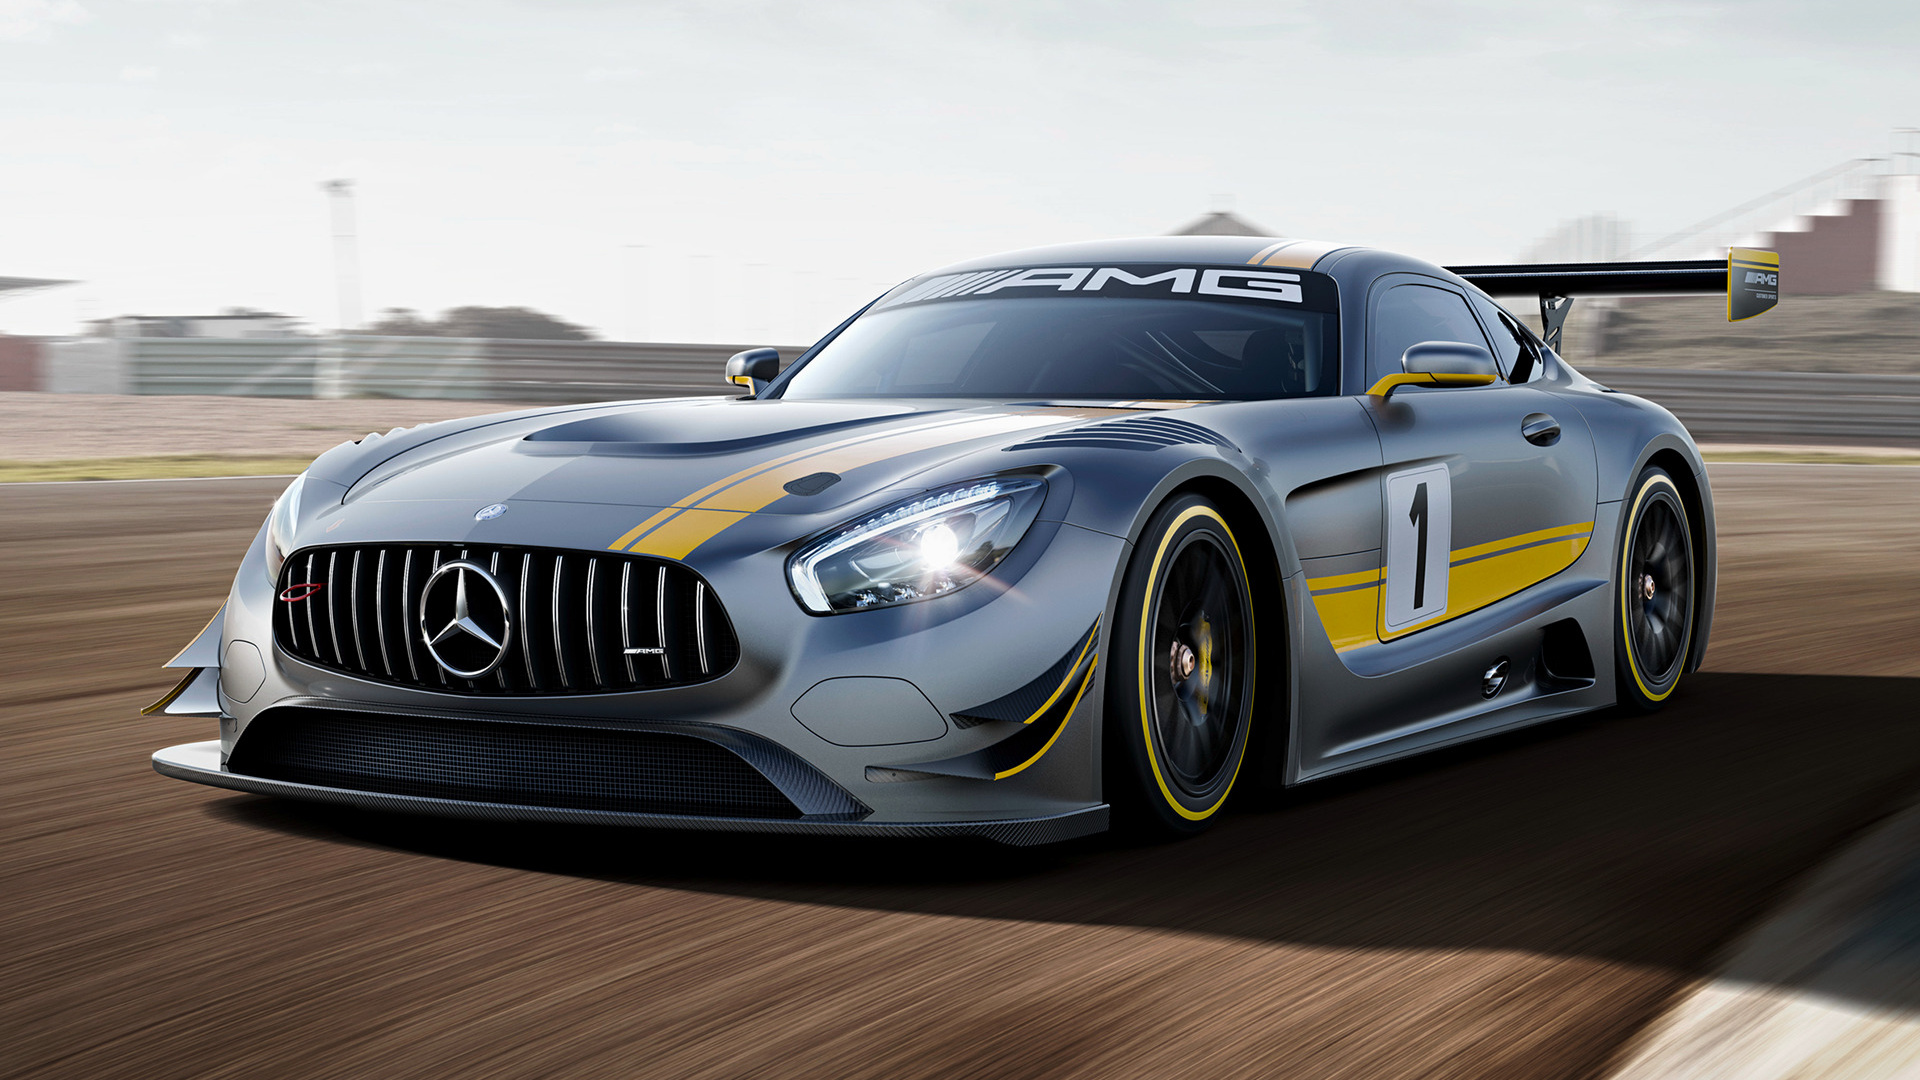 Mercedes AMG GT3 2015 Wallpapers and HD Images